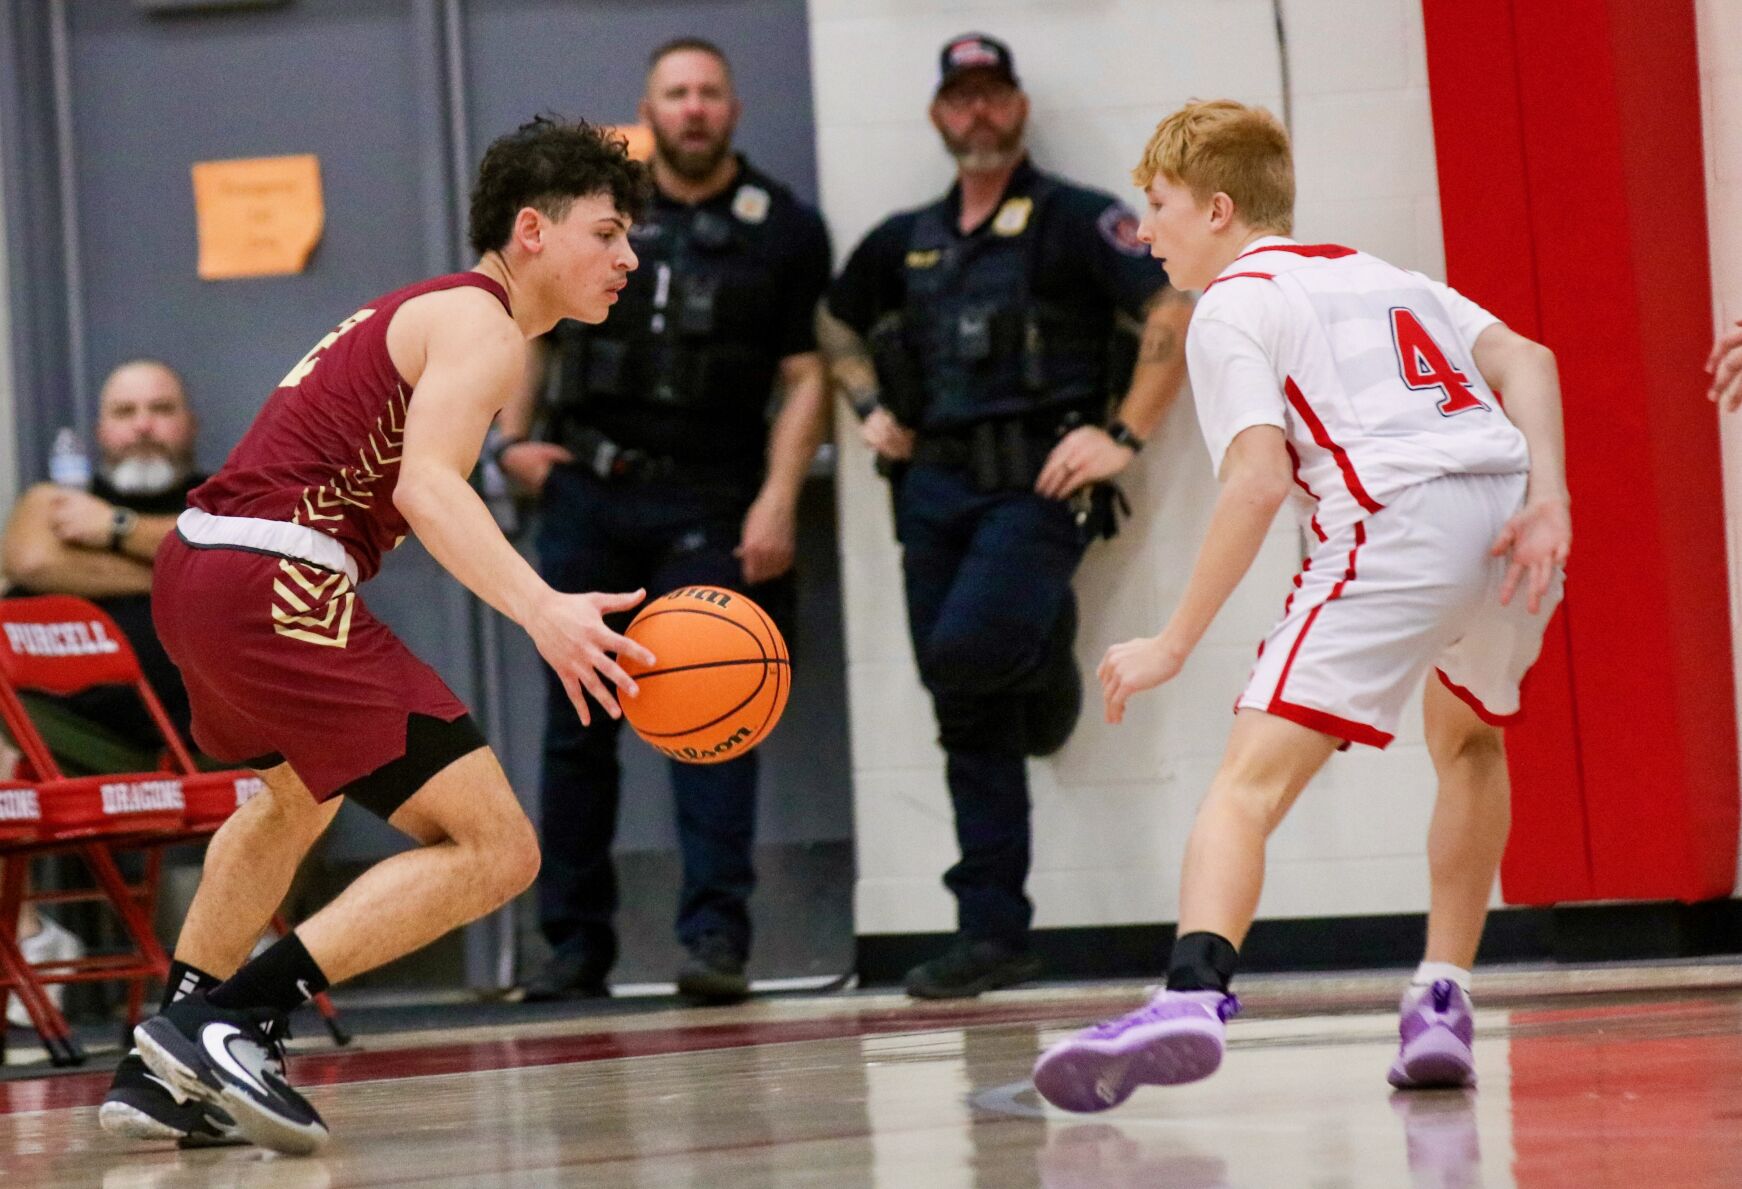 Byng High School Boys Basketball Secures Victory in Semifinals But Falls Short in Championship